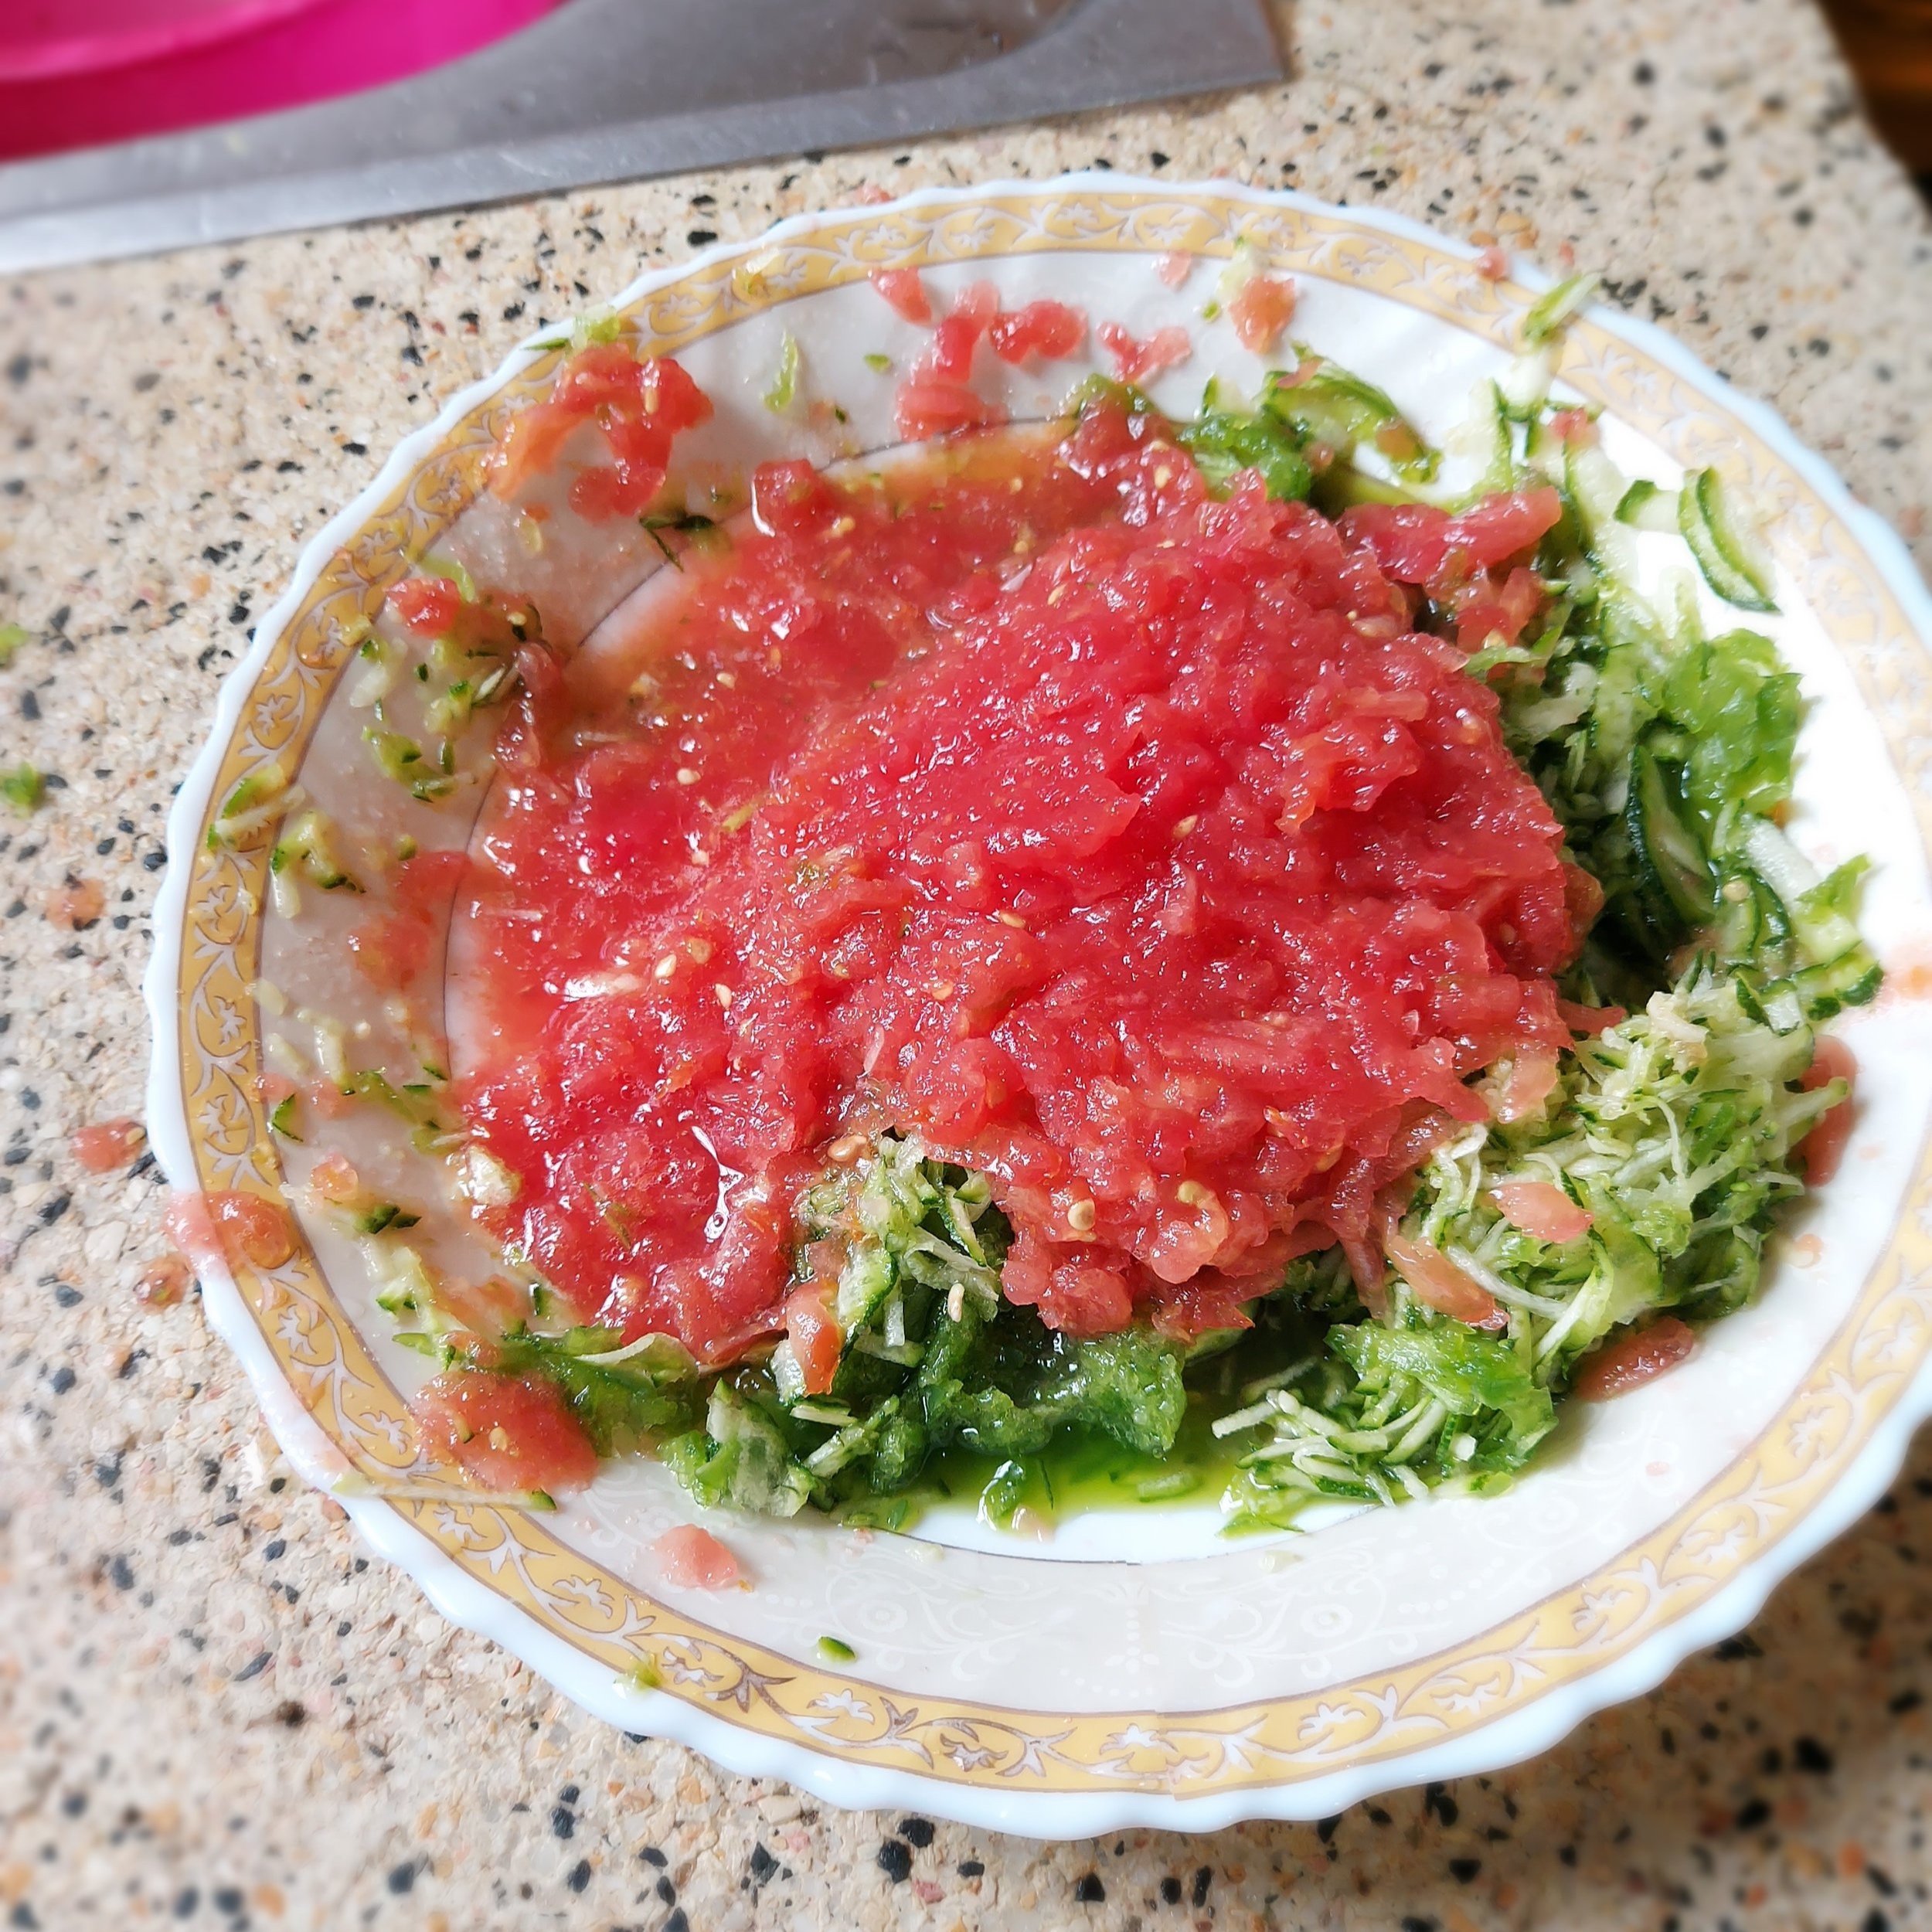 Grated tomatoes and greens